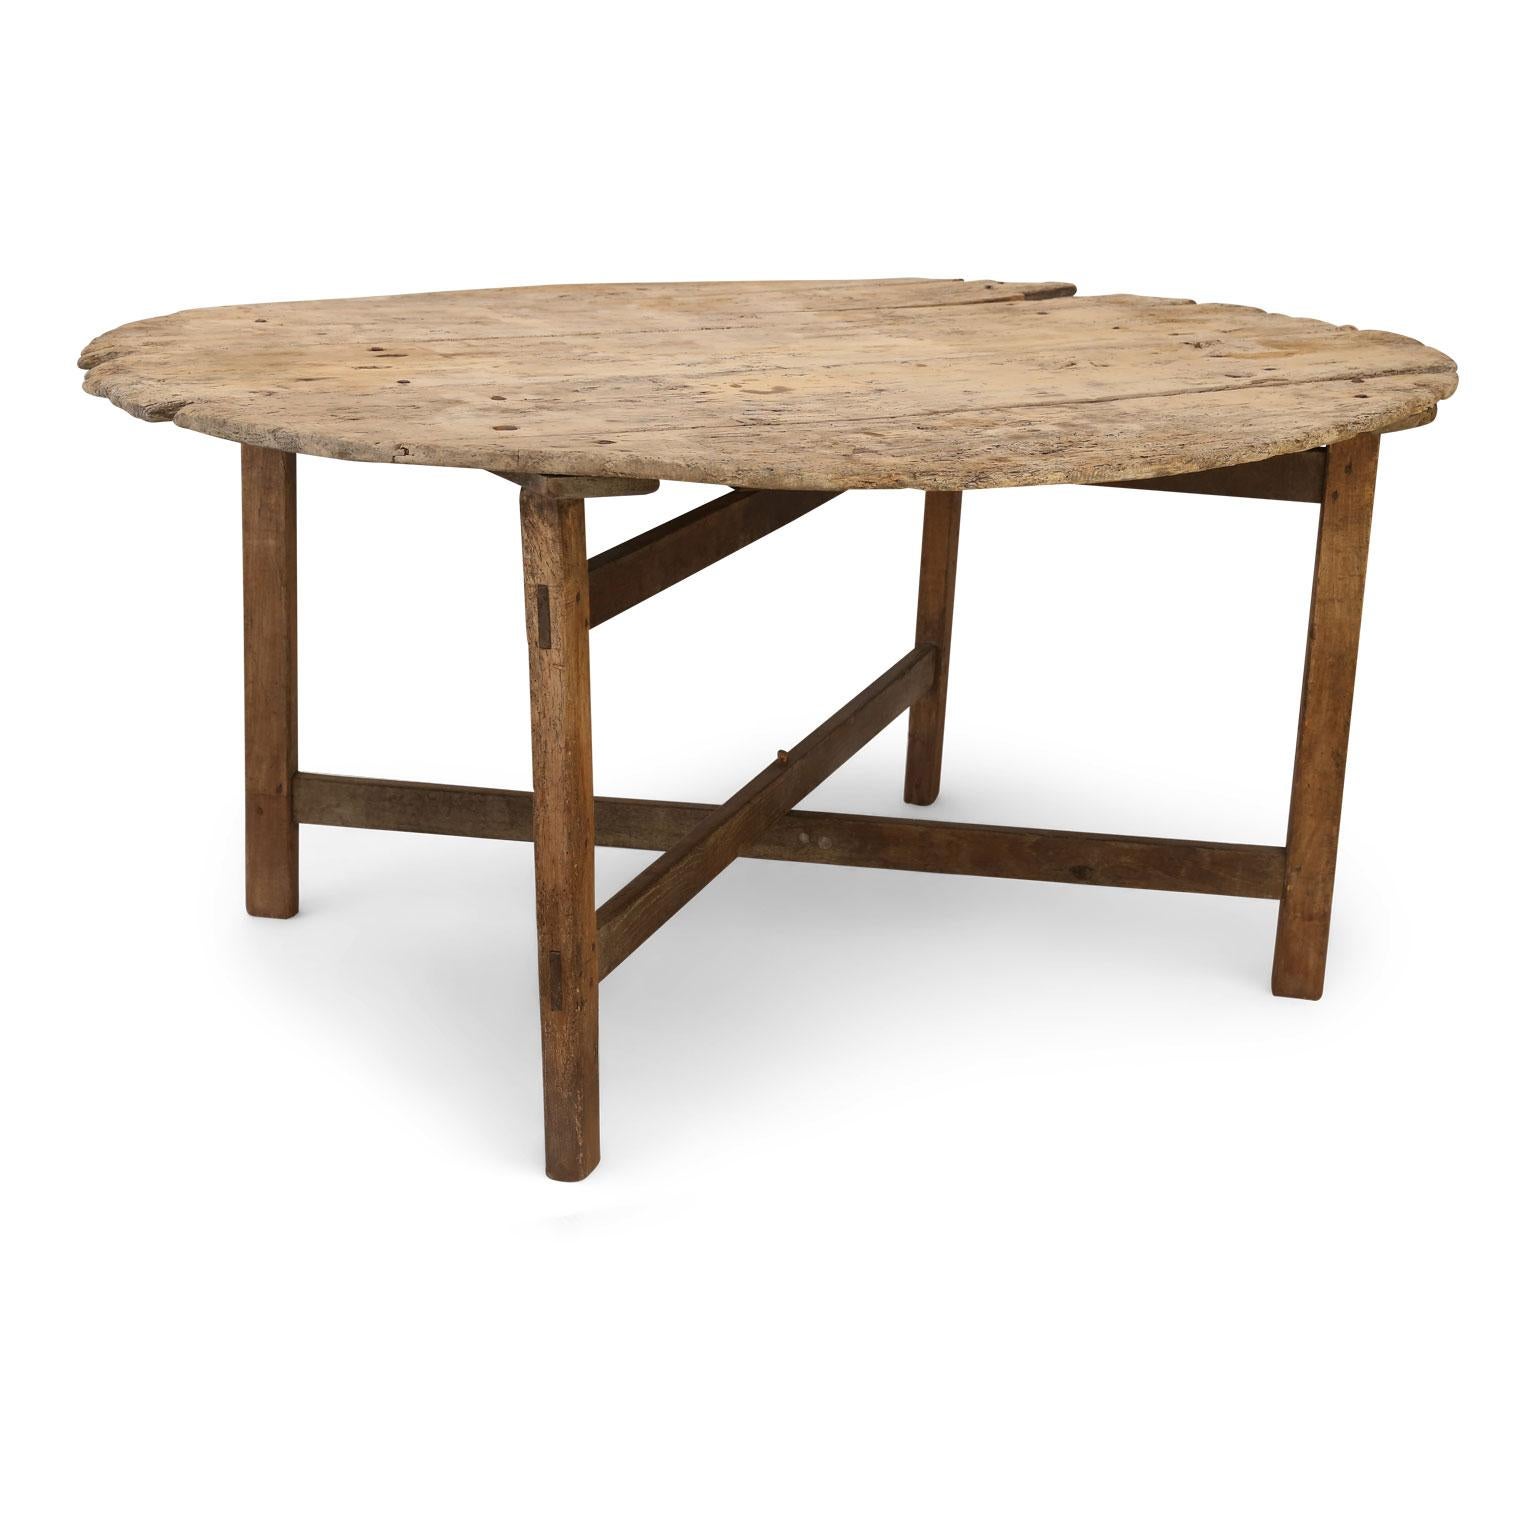 Unusually large early vendange table dating to early 19th century, France. Understated simple lines and an exquisite naturally weathered and sun-bleached pale, dry patina. Collapsible base, irregular edges and age separation/shrinkage between top's